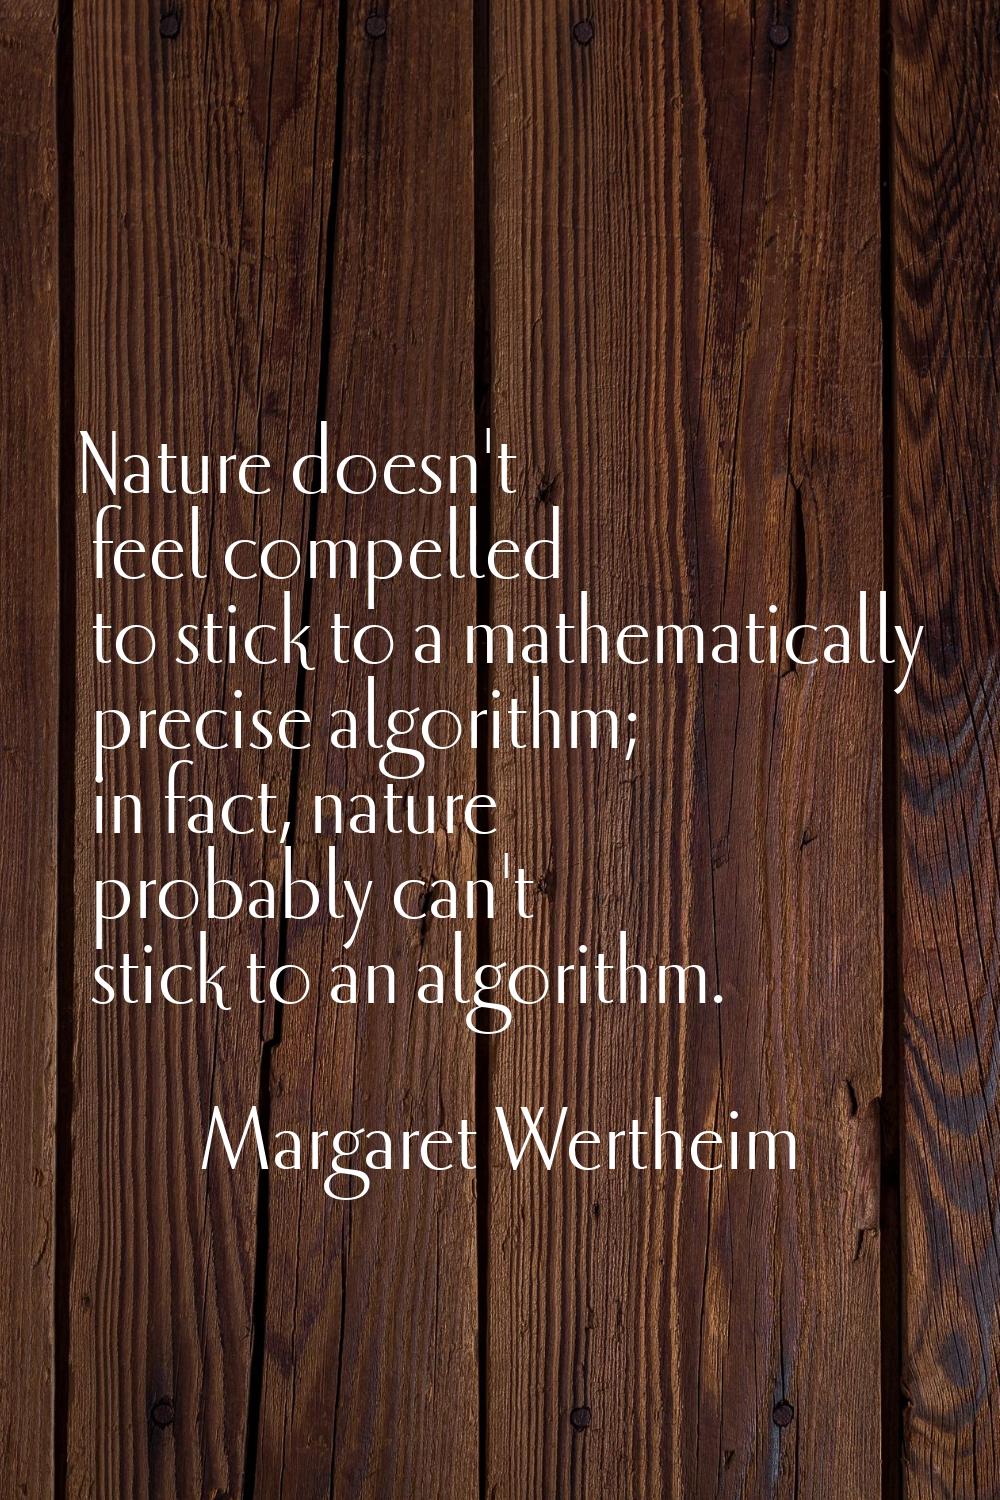 Nature doesn't feel compelled to stick to a mathematically precise algorithm; in fact, nature proba